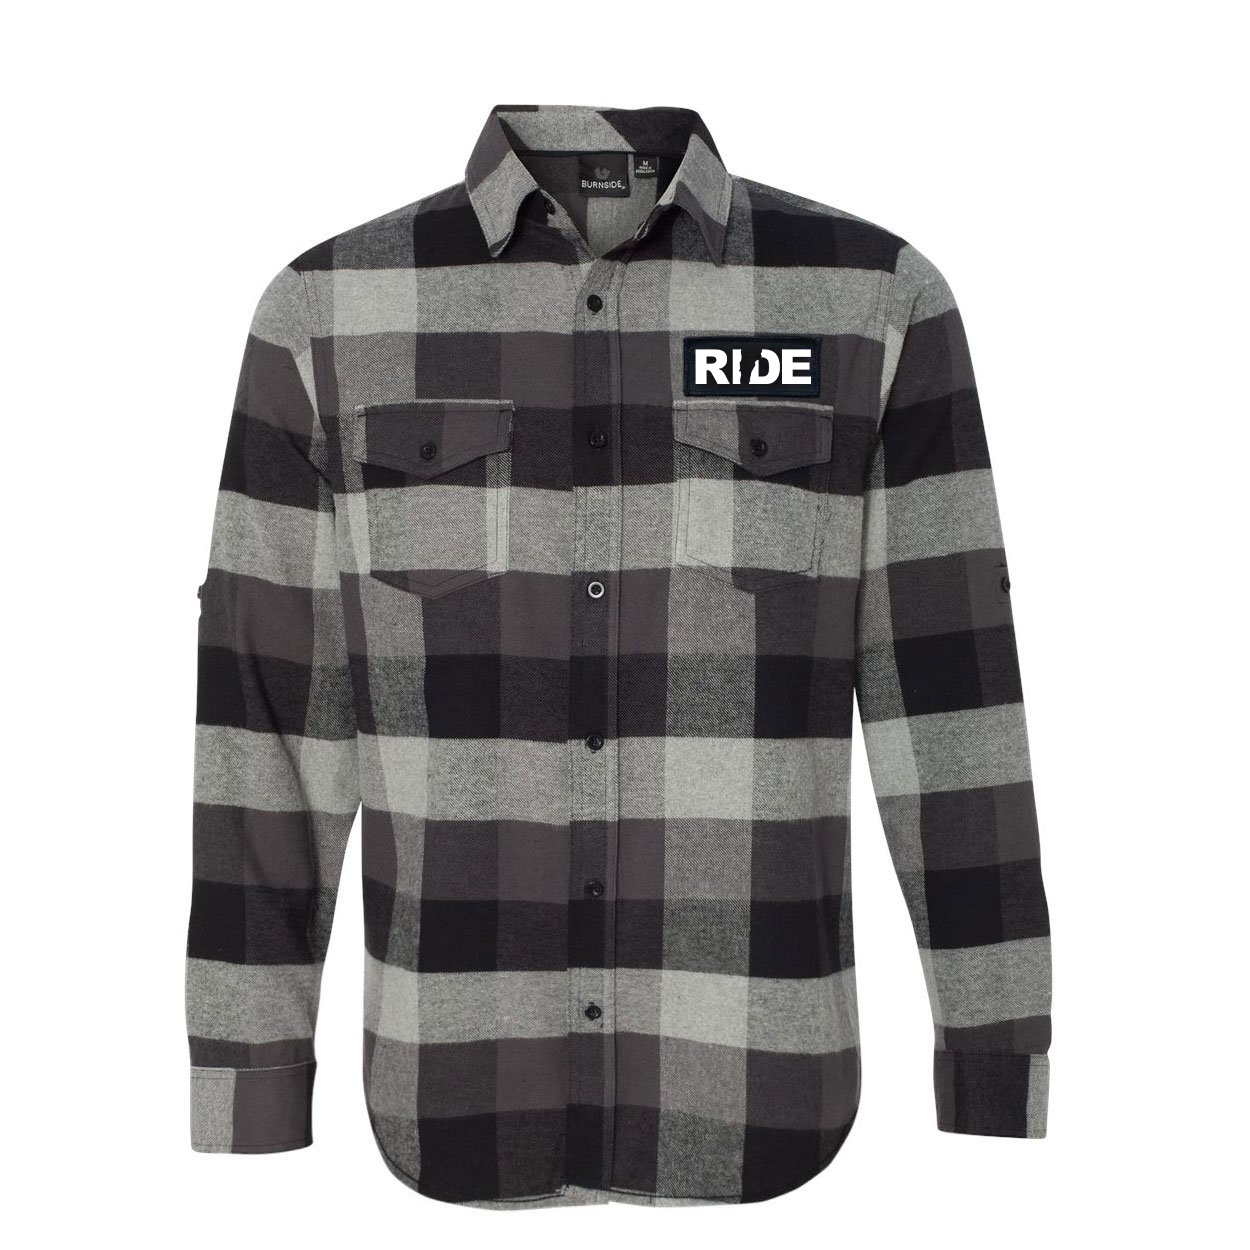 Ride Vermont Classic Unisex Long Sleeve Woven Patch Flannel Shirt Black/Gray (White Logo)